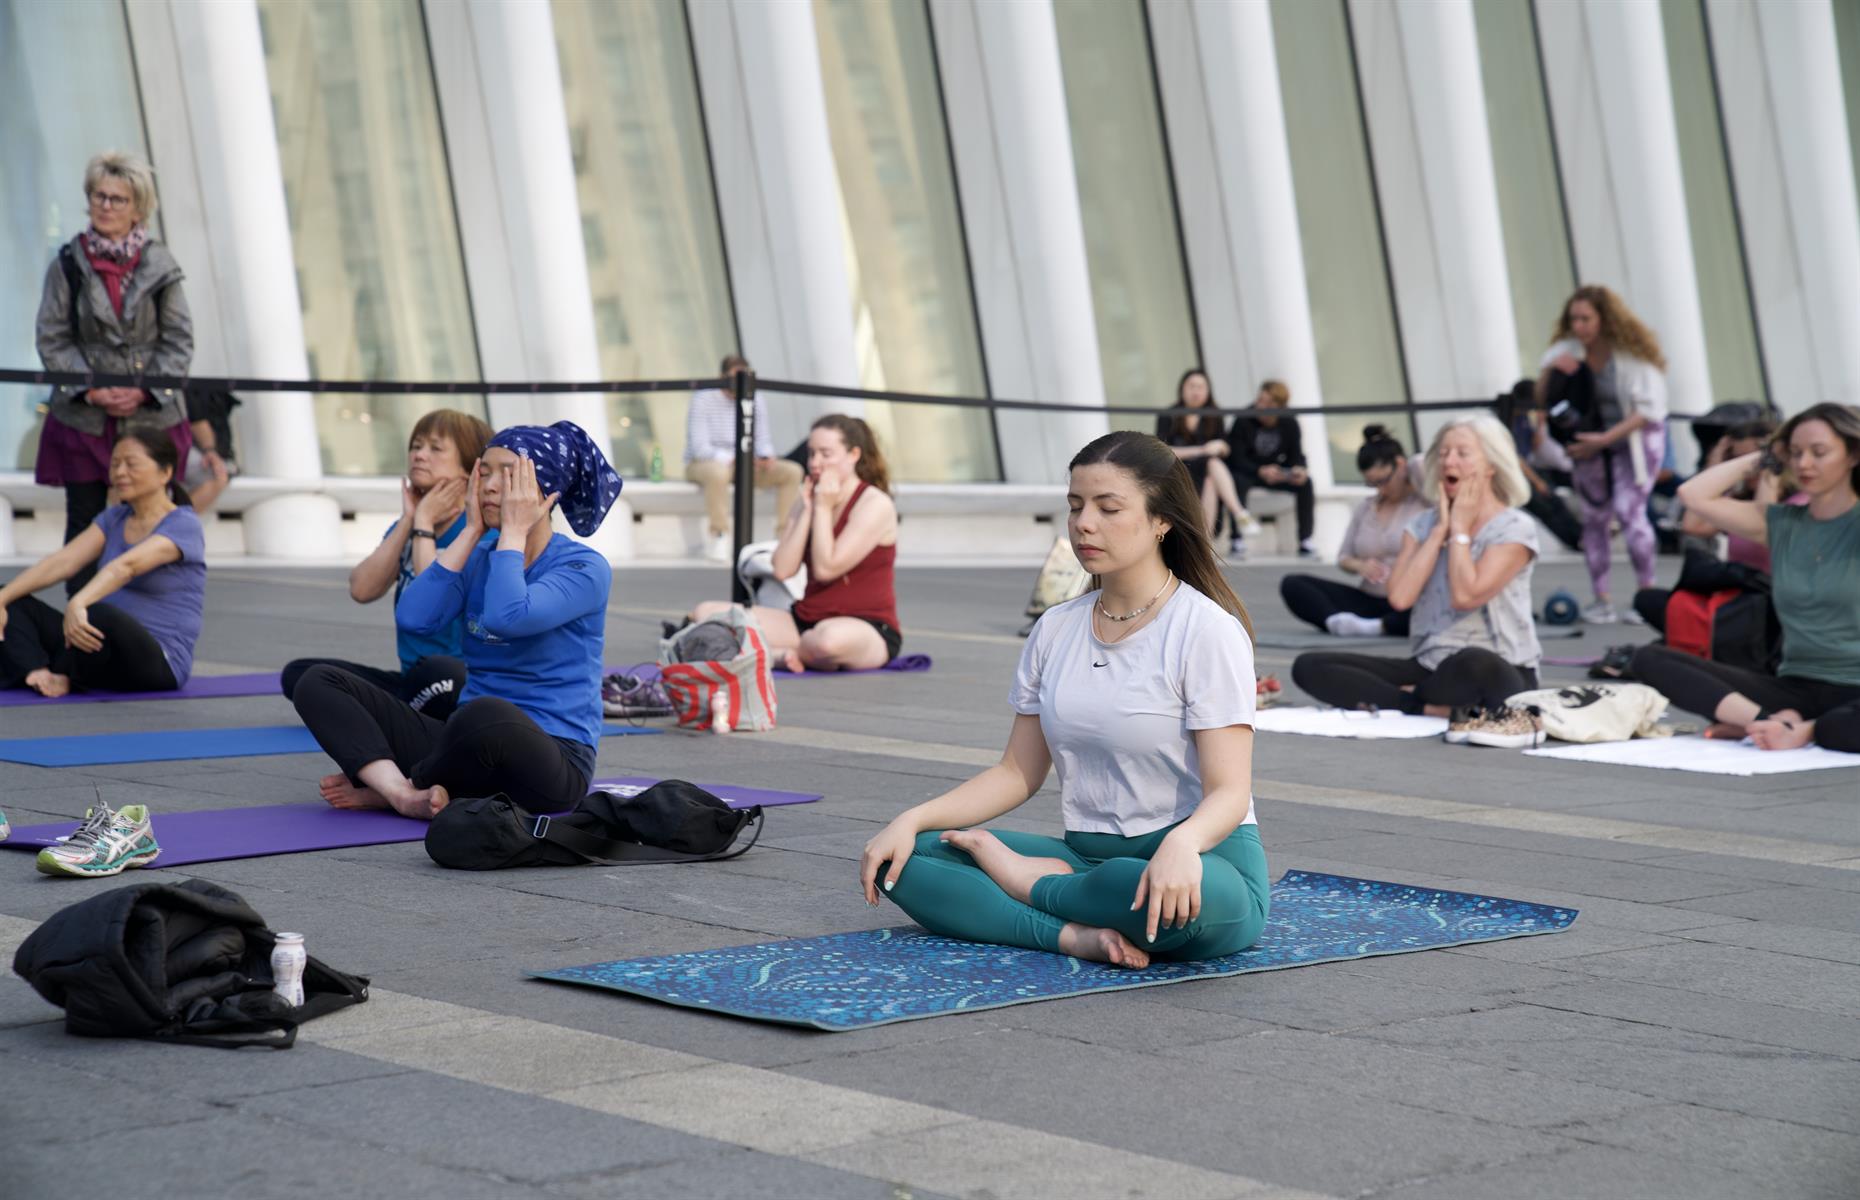 <p>Overdone the Manhattans? Chowed down on too many supersized burgers? Offset some of the damage by checking out one of the free Wellness Wednesday sessions held every Wednesday at the North Oculus Plaza. They’re a collaboration with New York-based Sputnik Yoga but the free classes are wonderfully diverse, covering everything from yoga and meditation to HIIT and Pilates. Note that due to New York’s harsh winters classes only take place between May and October.</p>